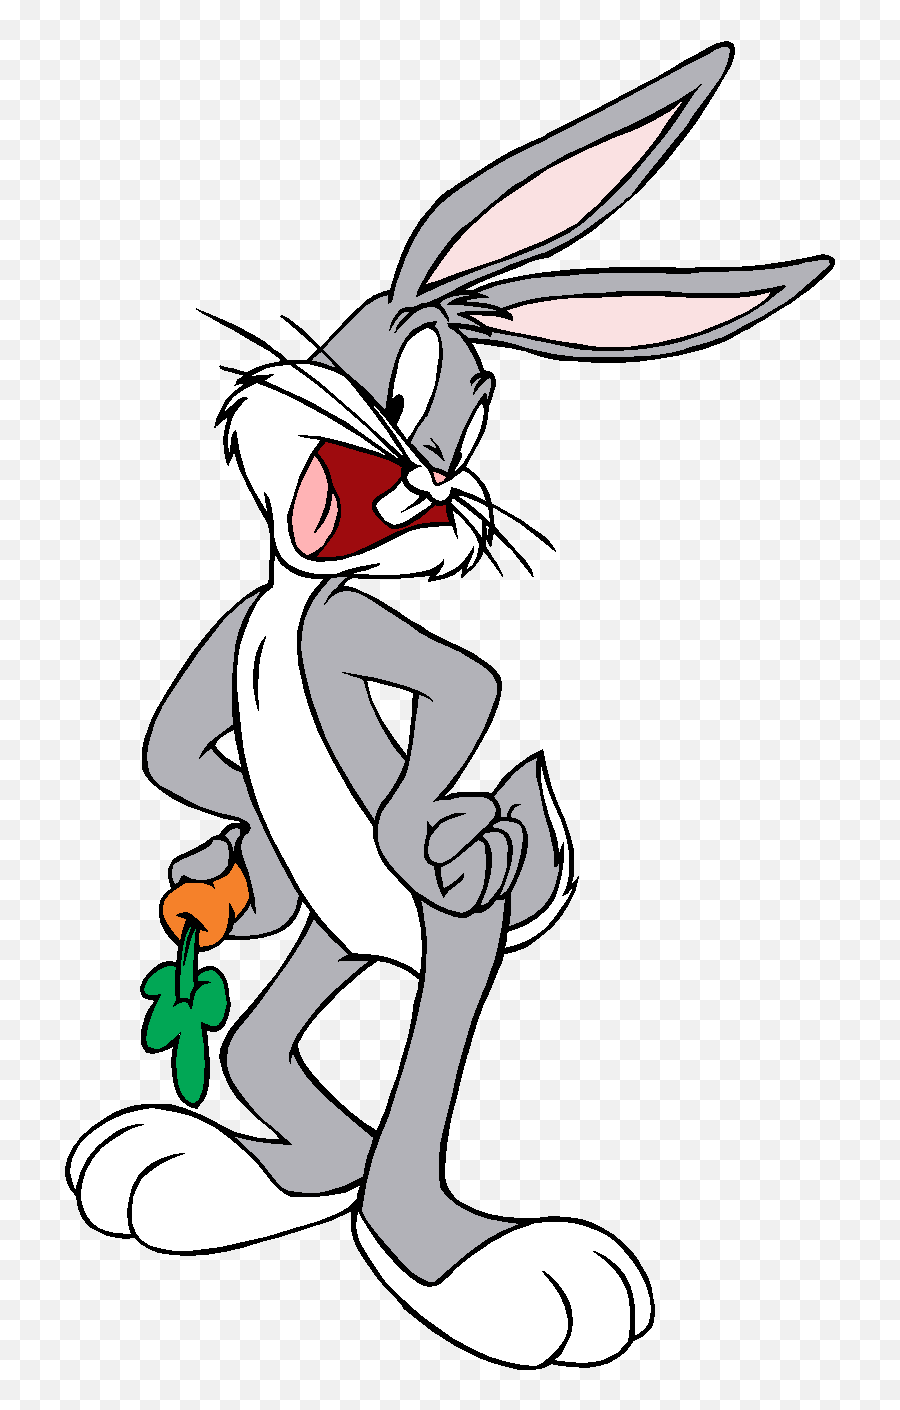 What Is Boomerang U2013 Help - Cartoon Bugs Bunny Png,Courage The Cowardly Dog Png